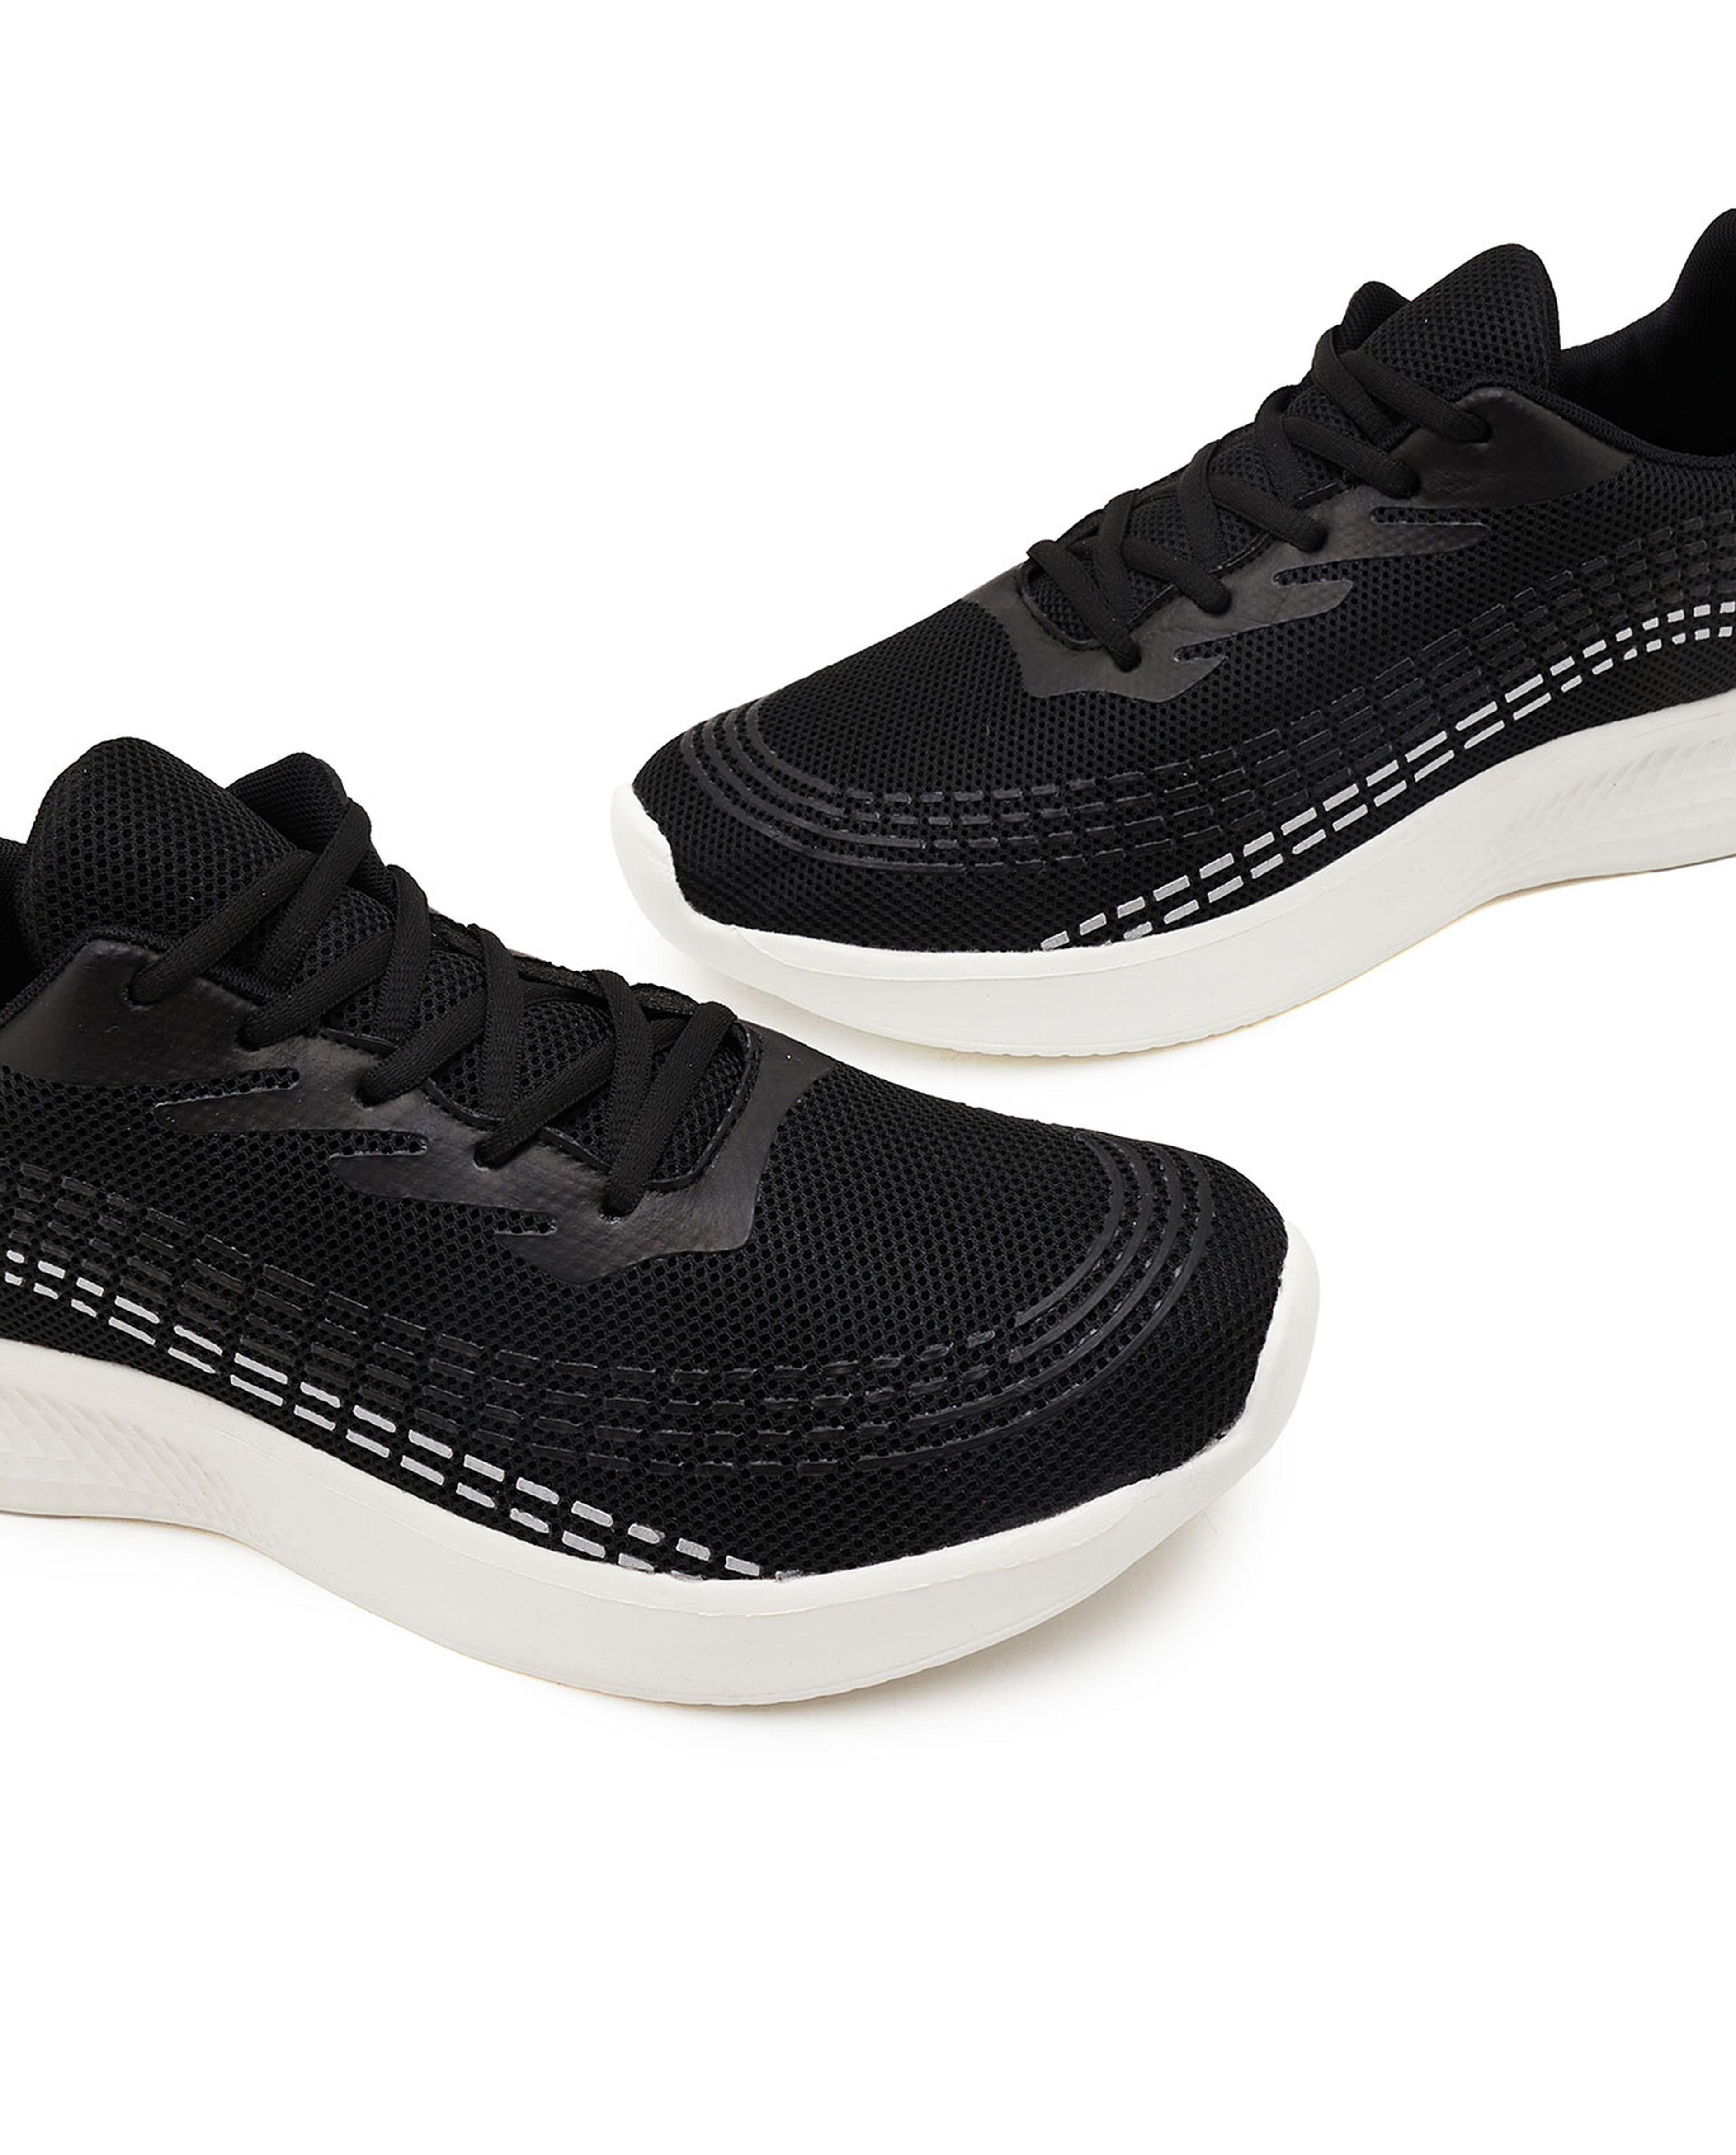 Patterned Lace-Up Running Shoes